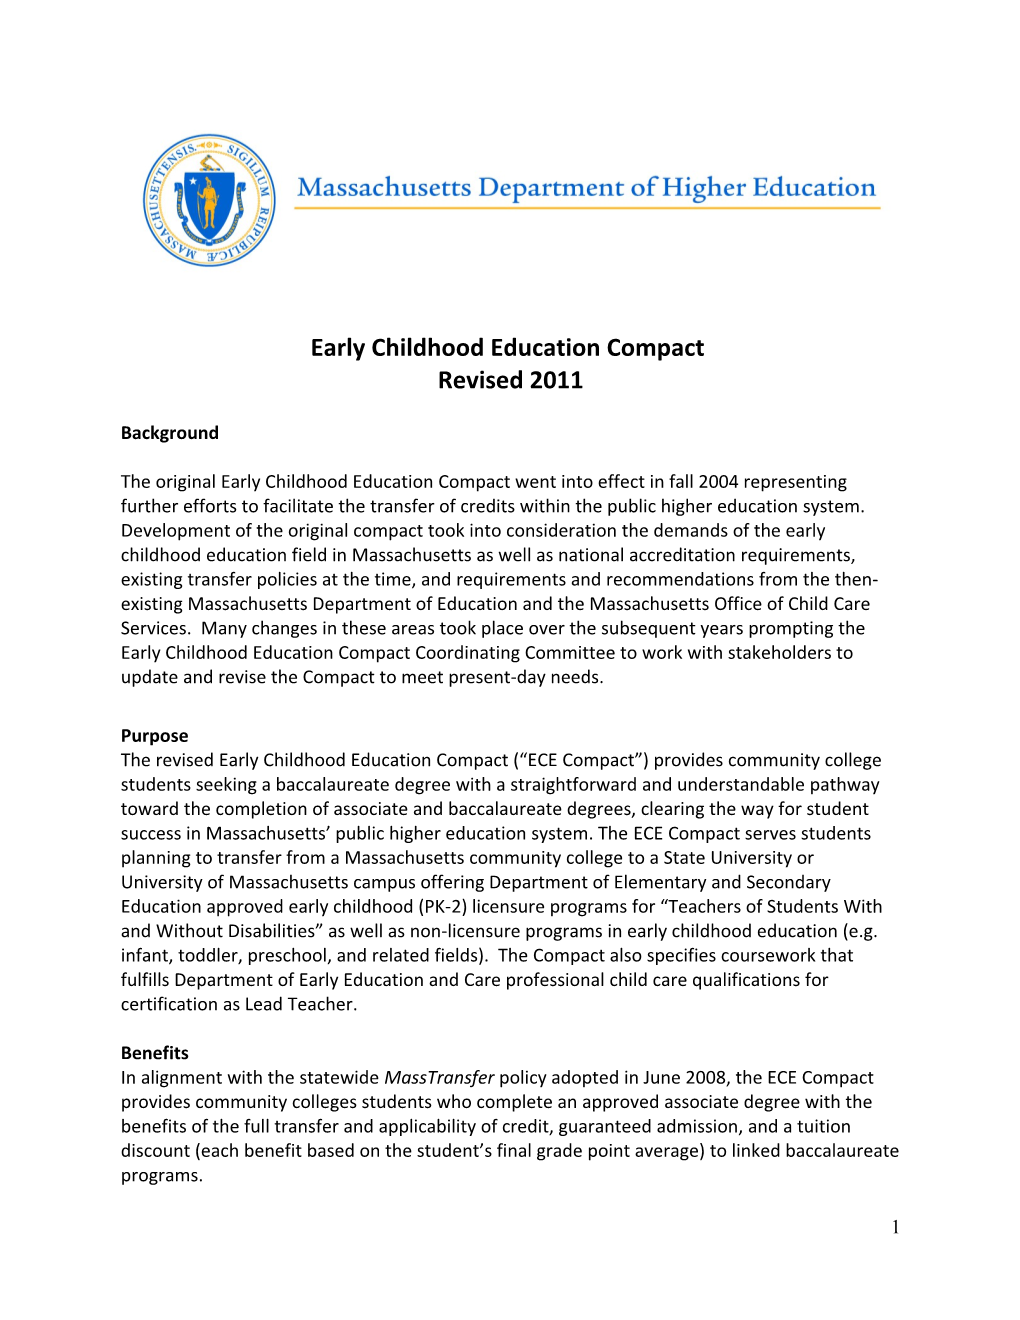 Early Childhood Education Compact